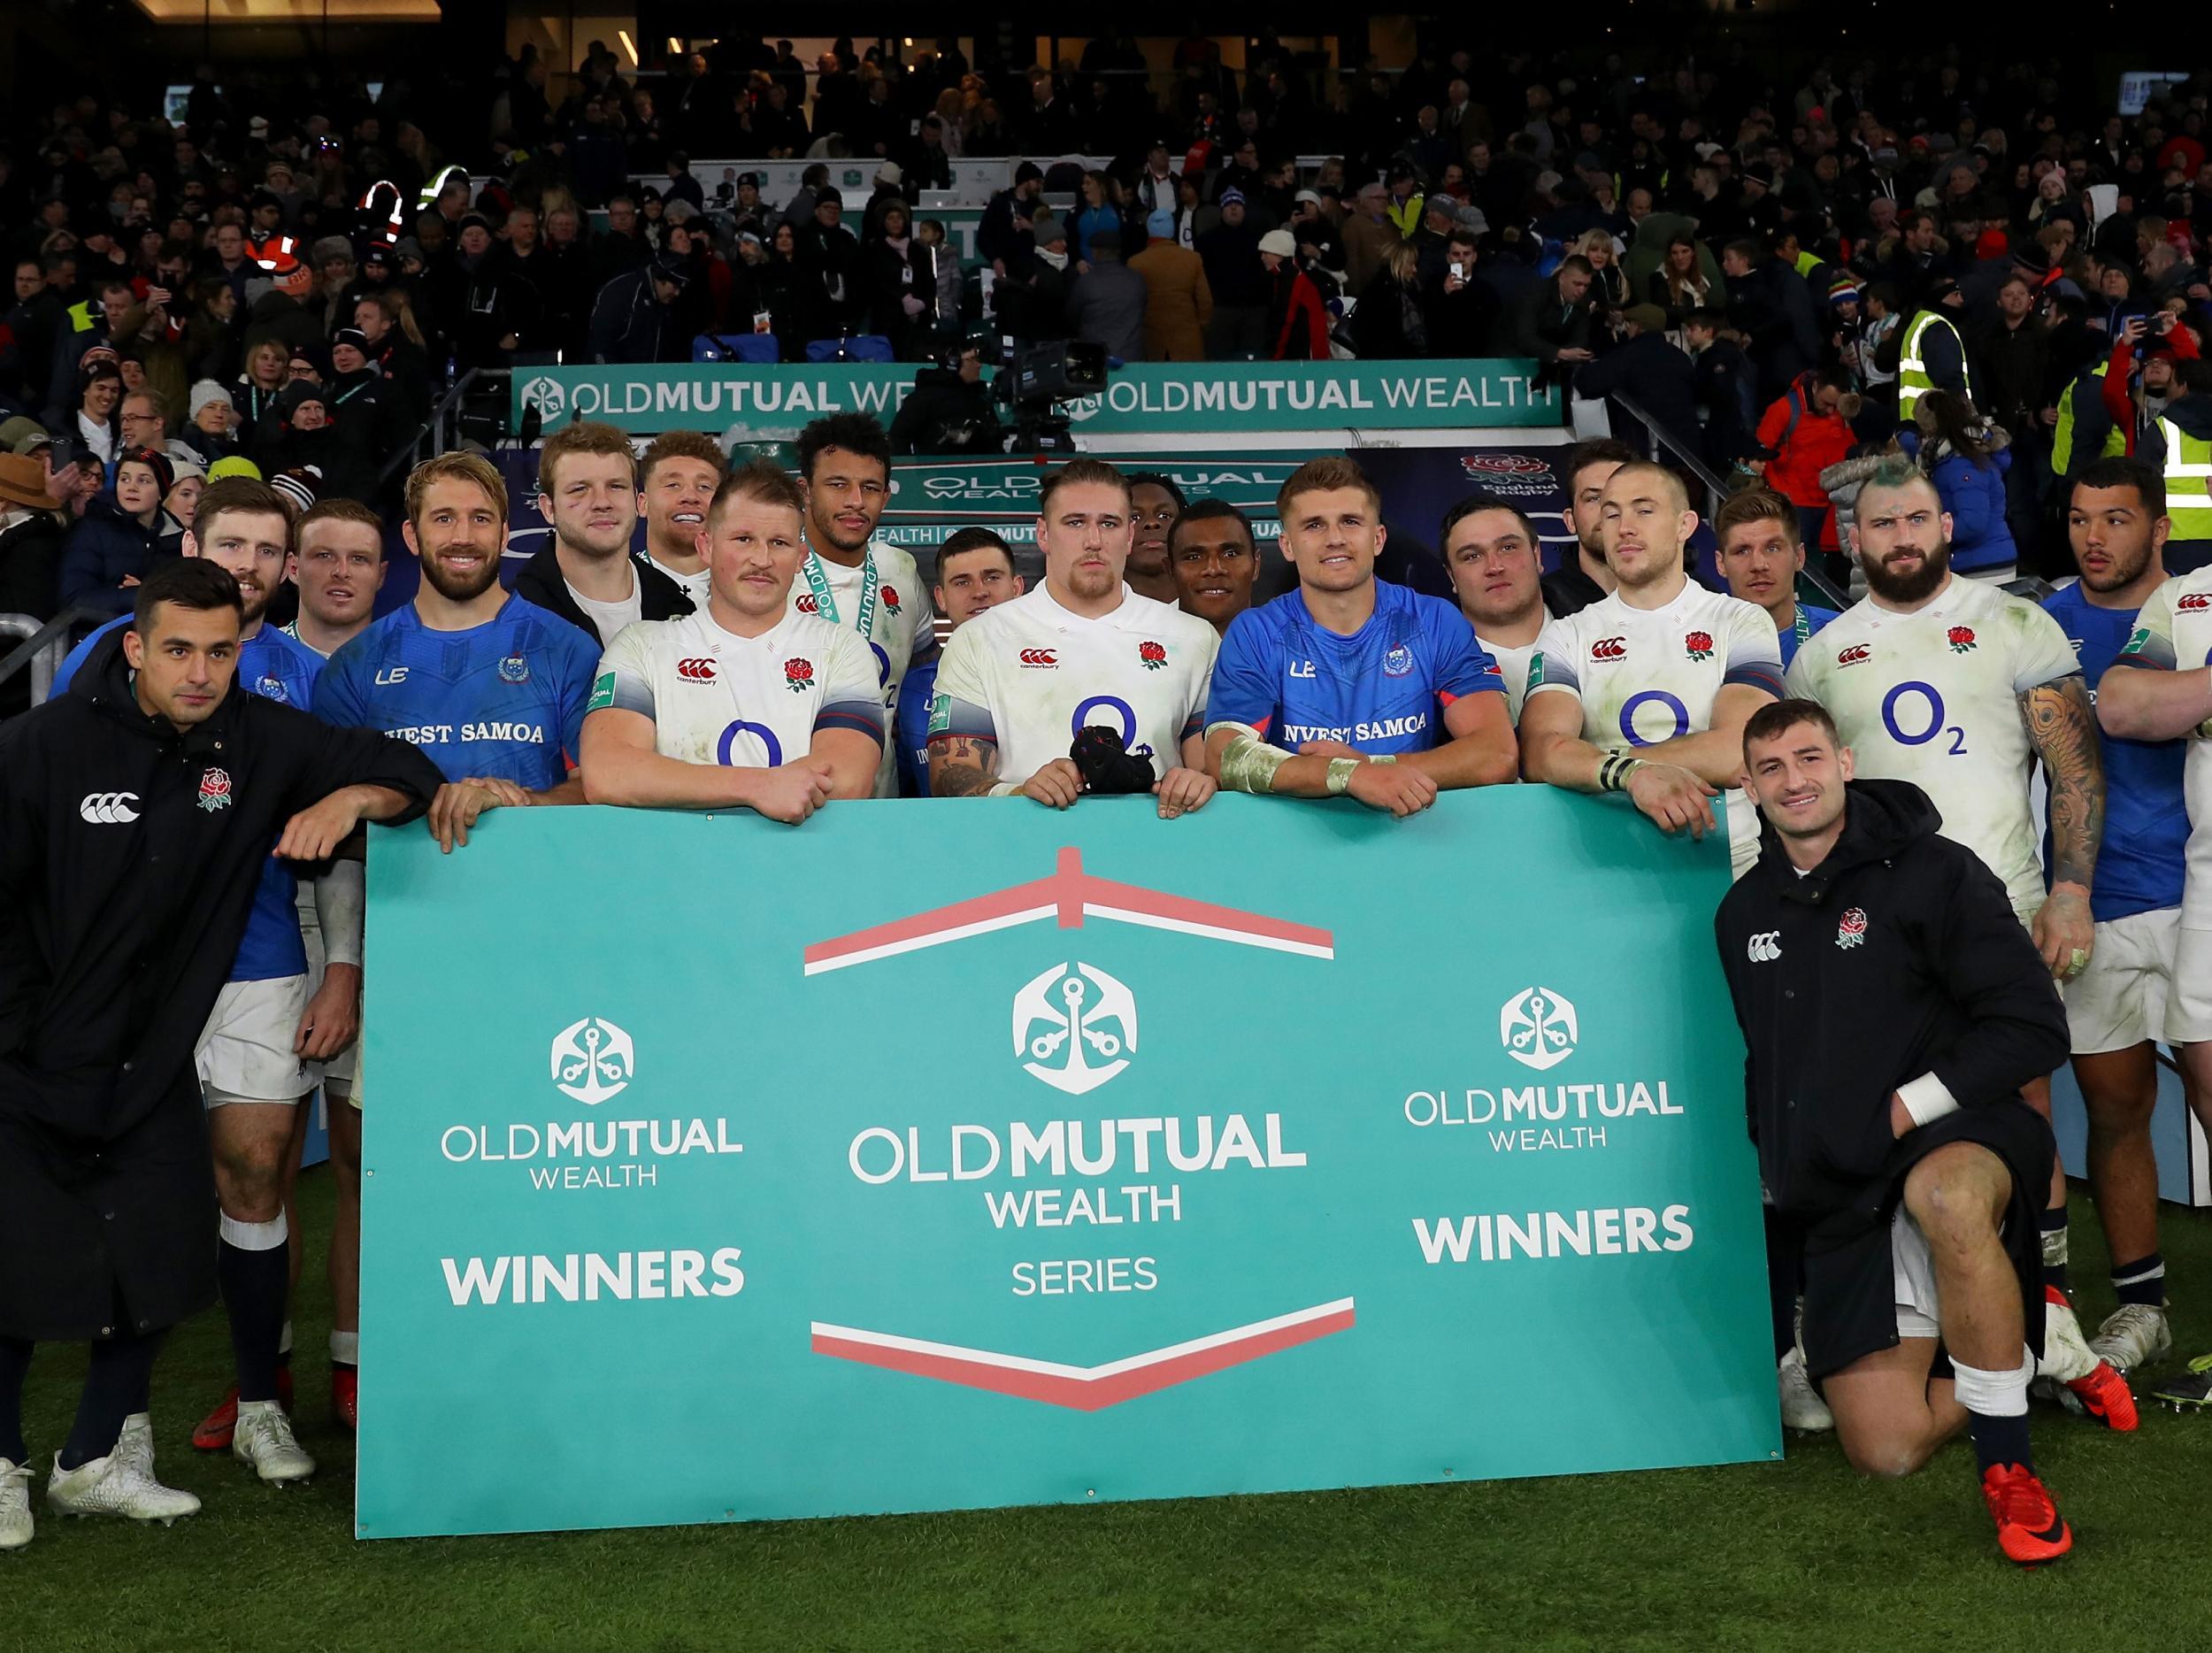 England completed a clean sweep this autumn with victory over Samoa